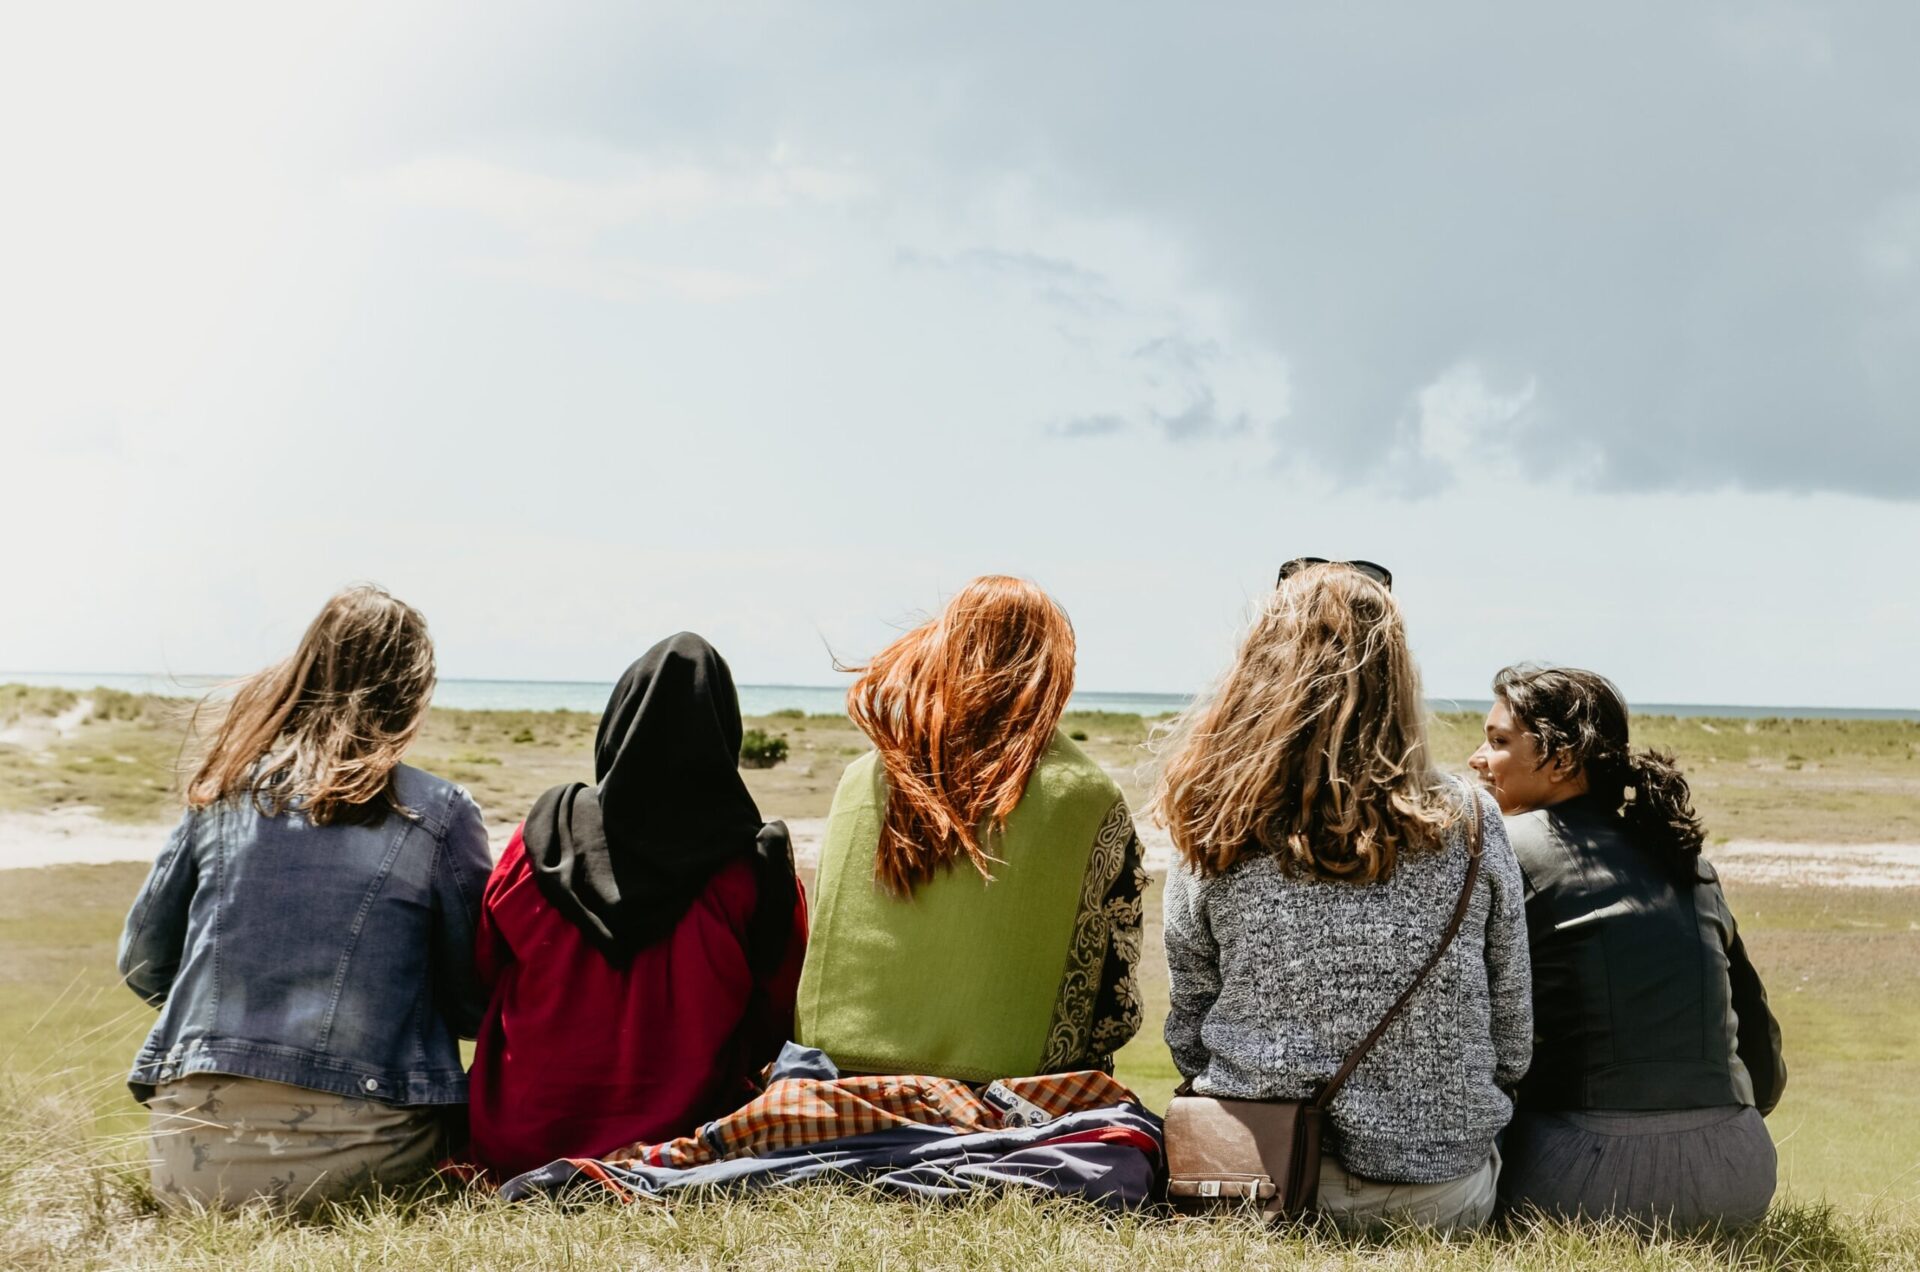 5 girls/woman sat looking out over the ocean